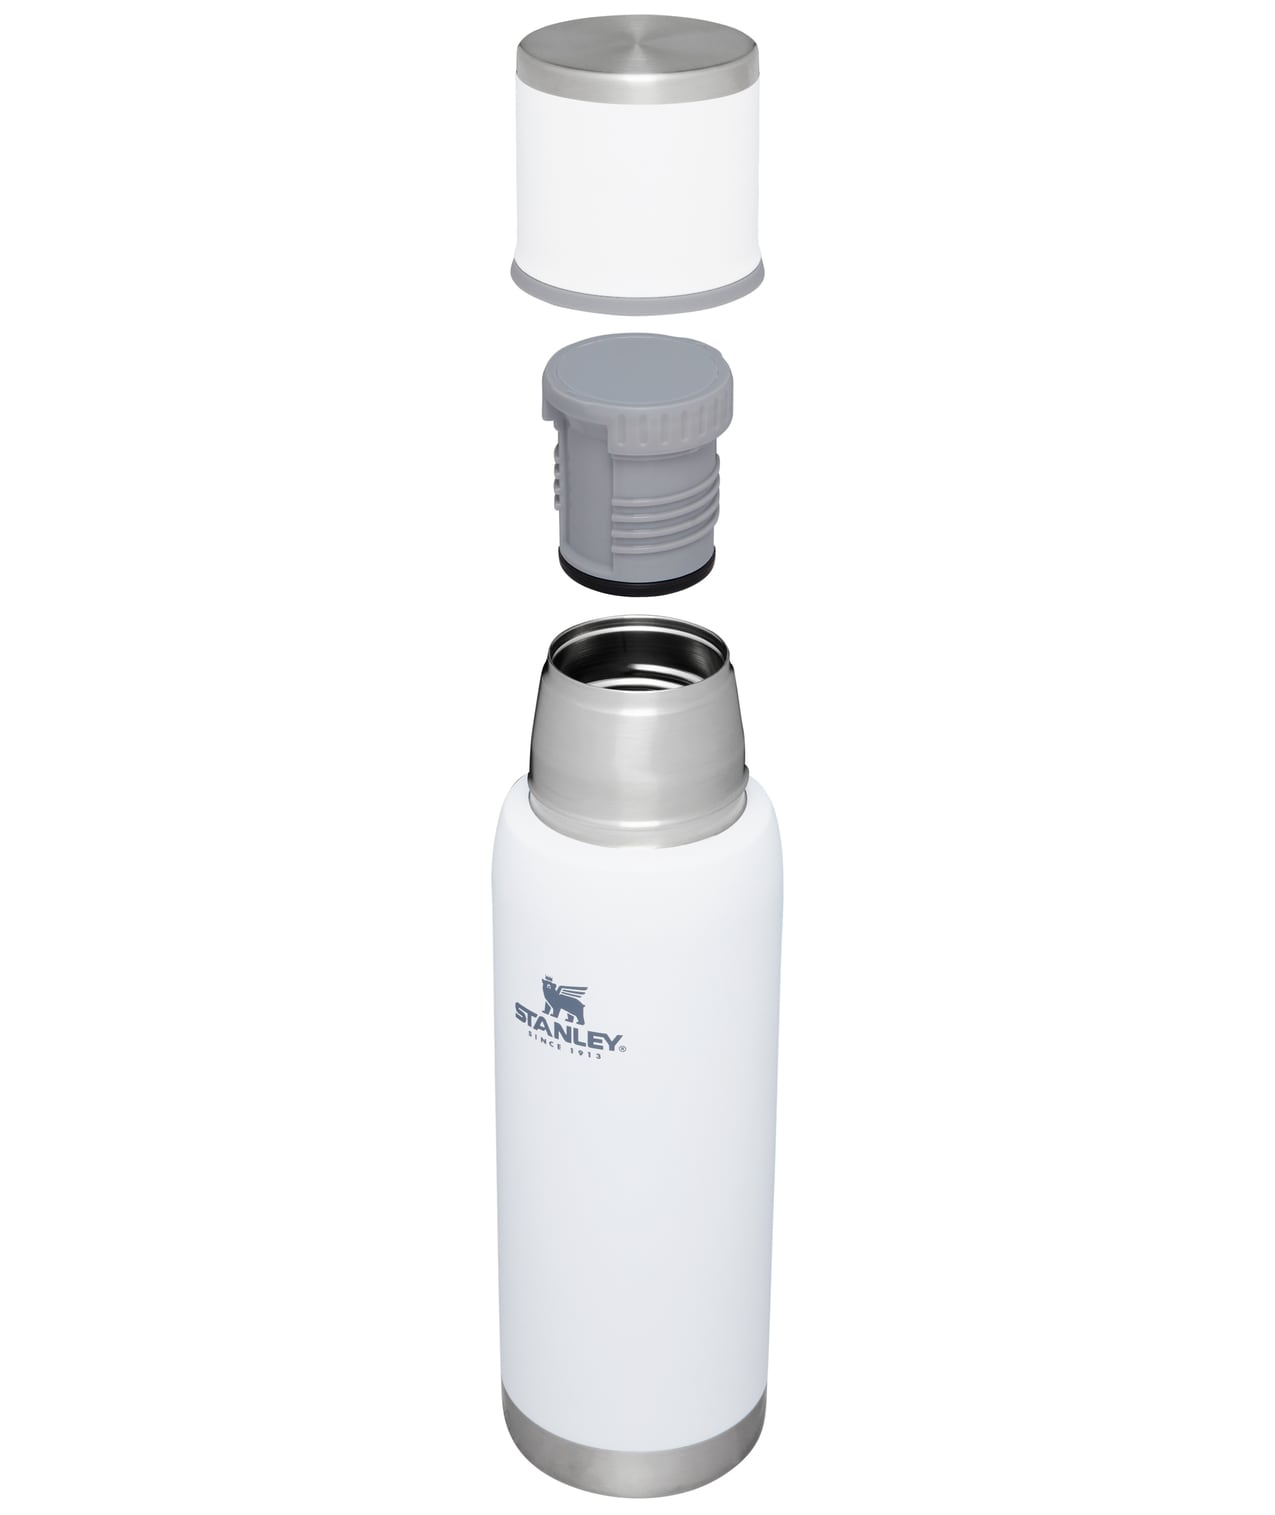 Stanley Classic Stainless Steel Vacuum Insulated Thermos Bottle